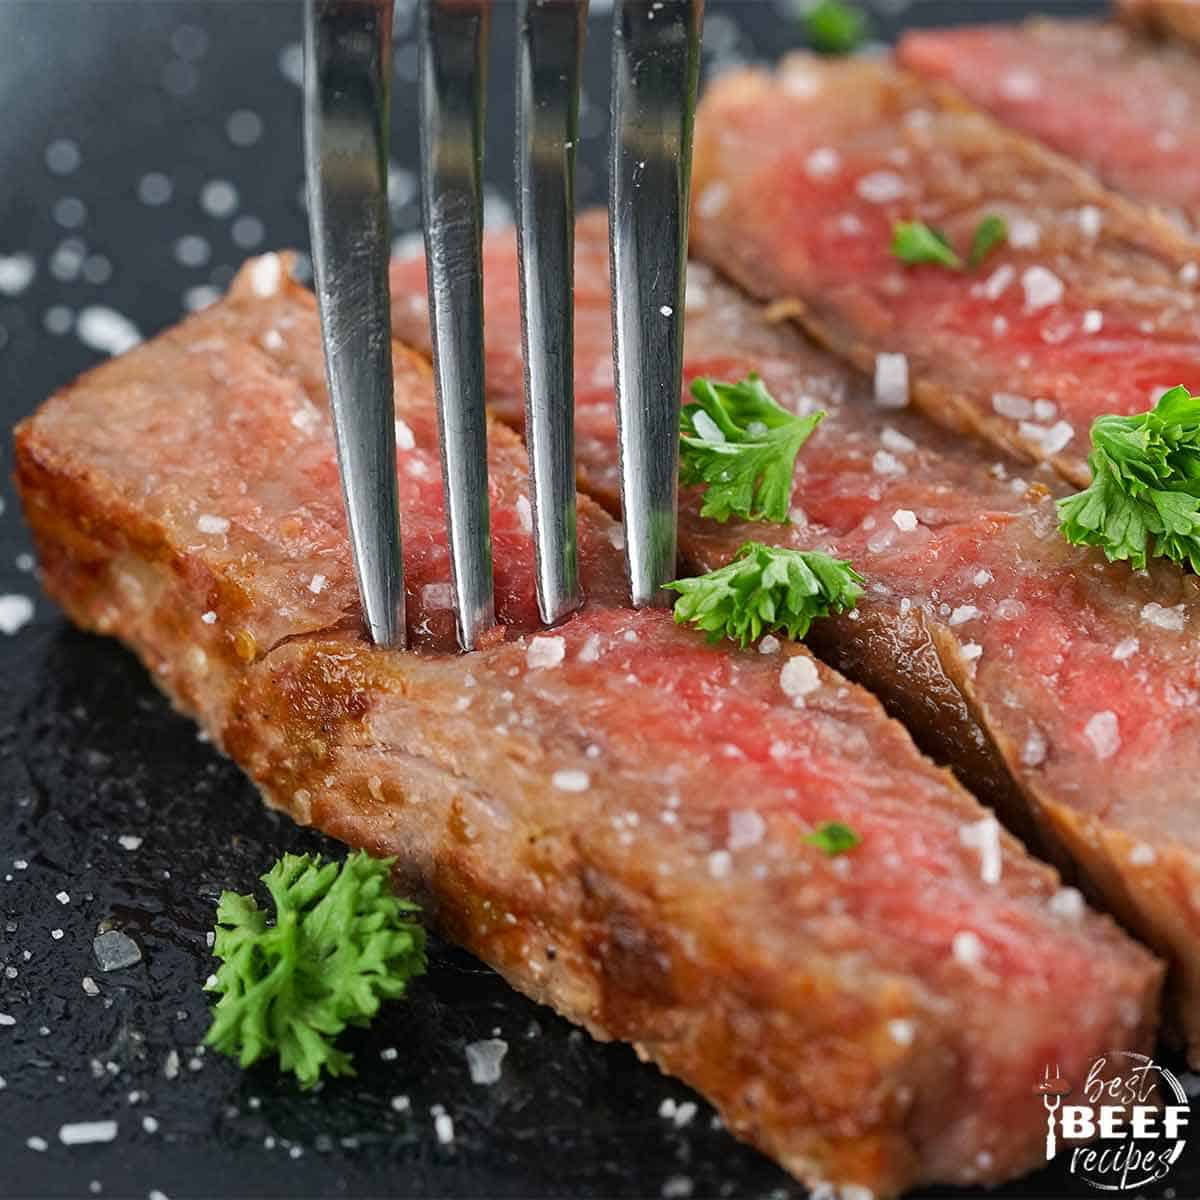 slices of wagyu steak up close with a fork